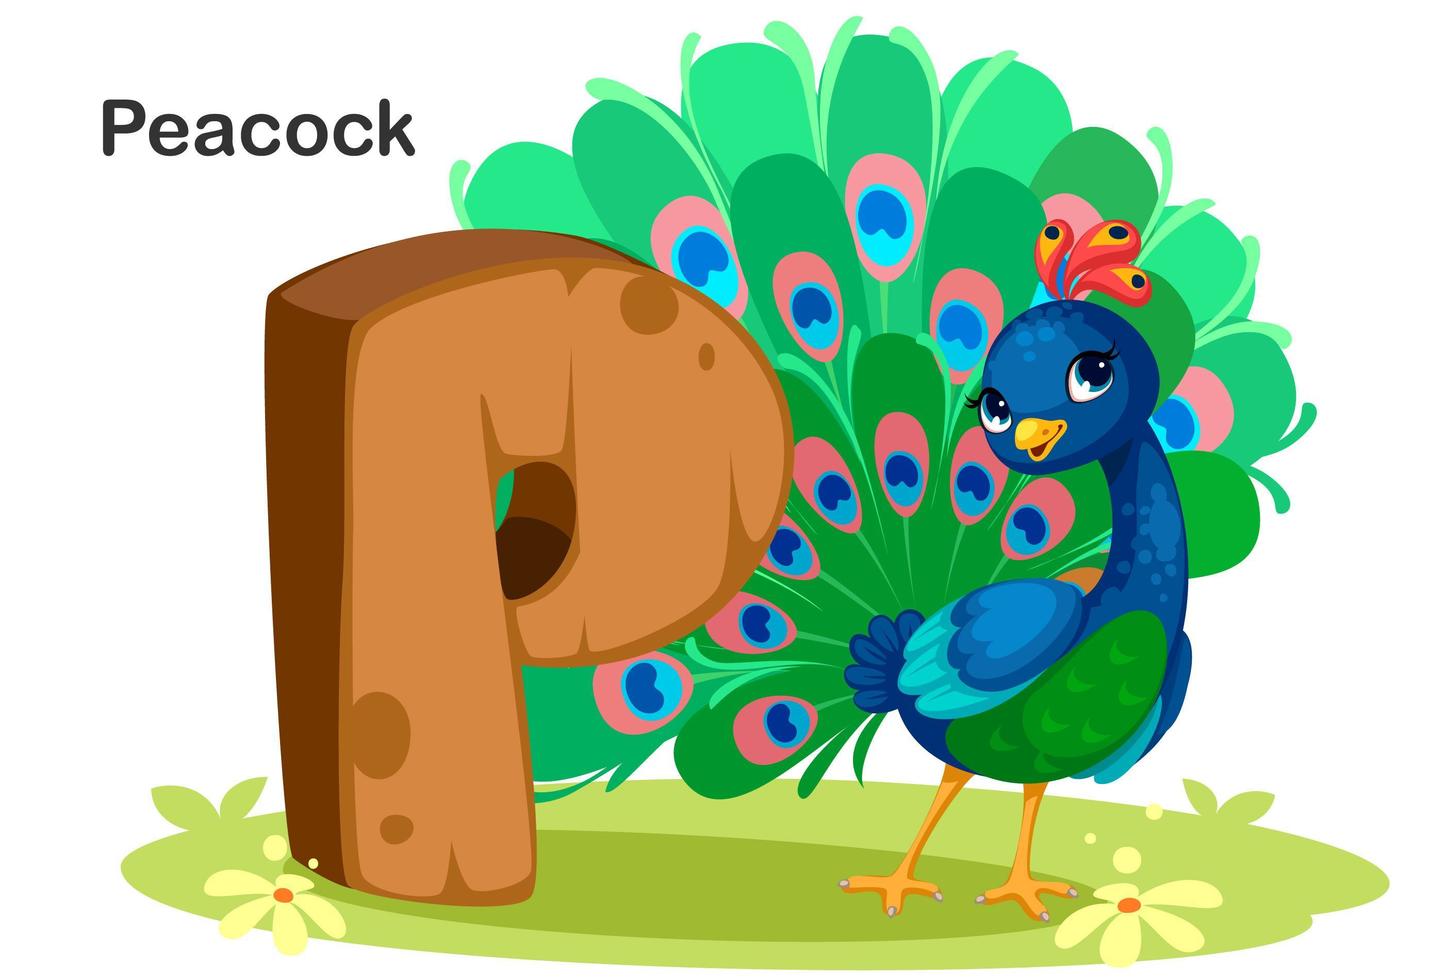 P for Peacock vector